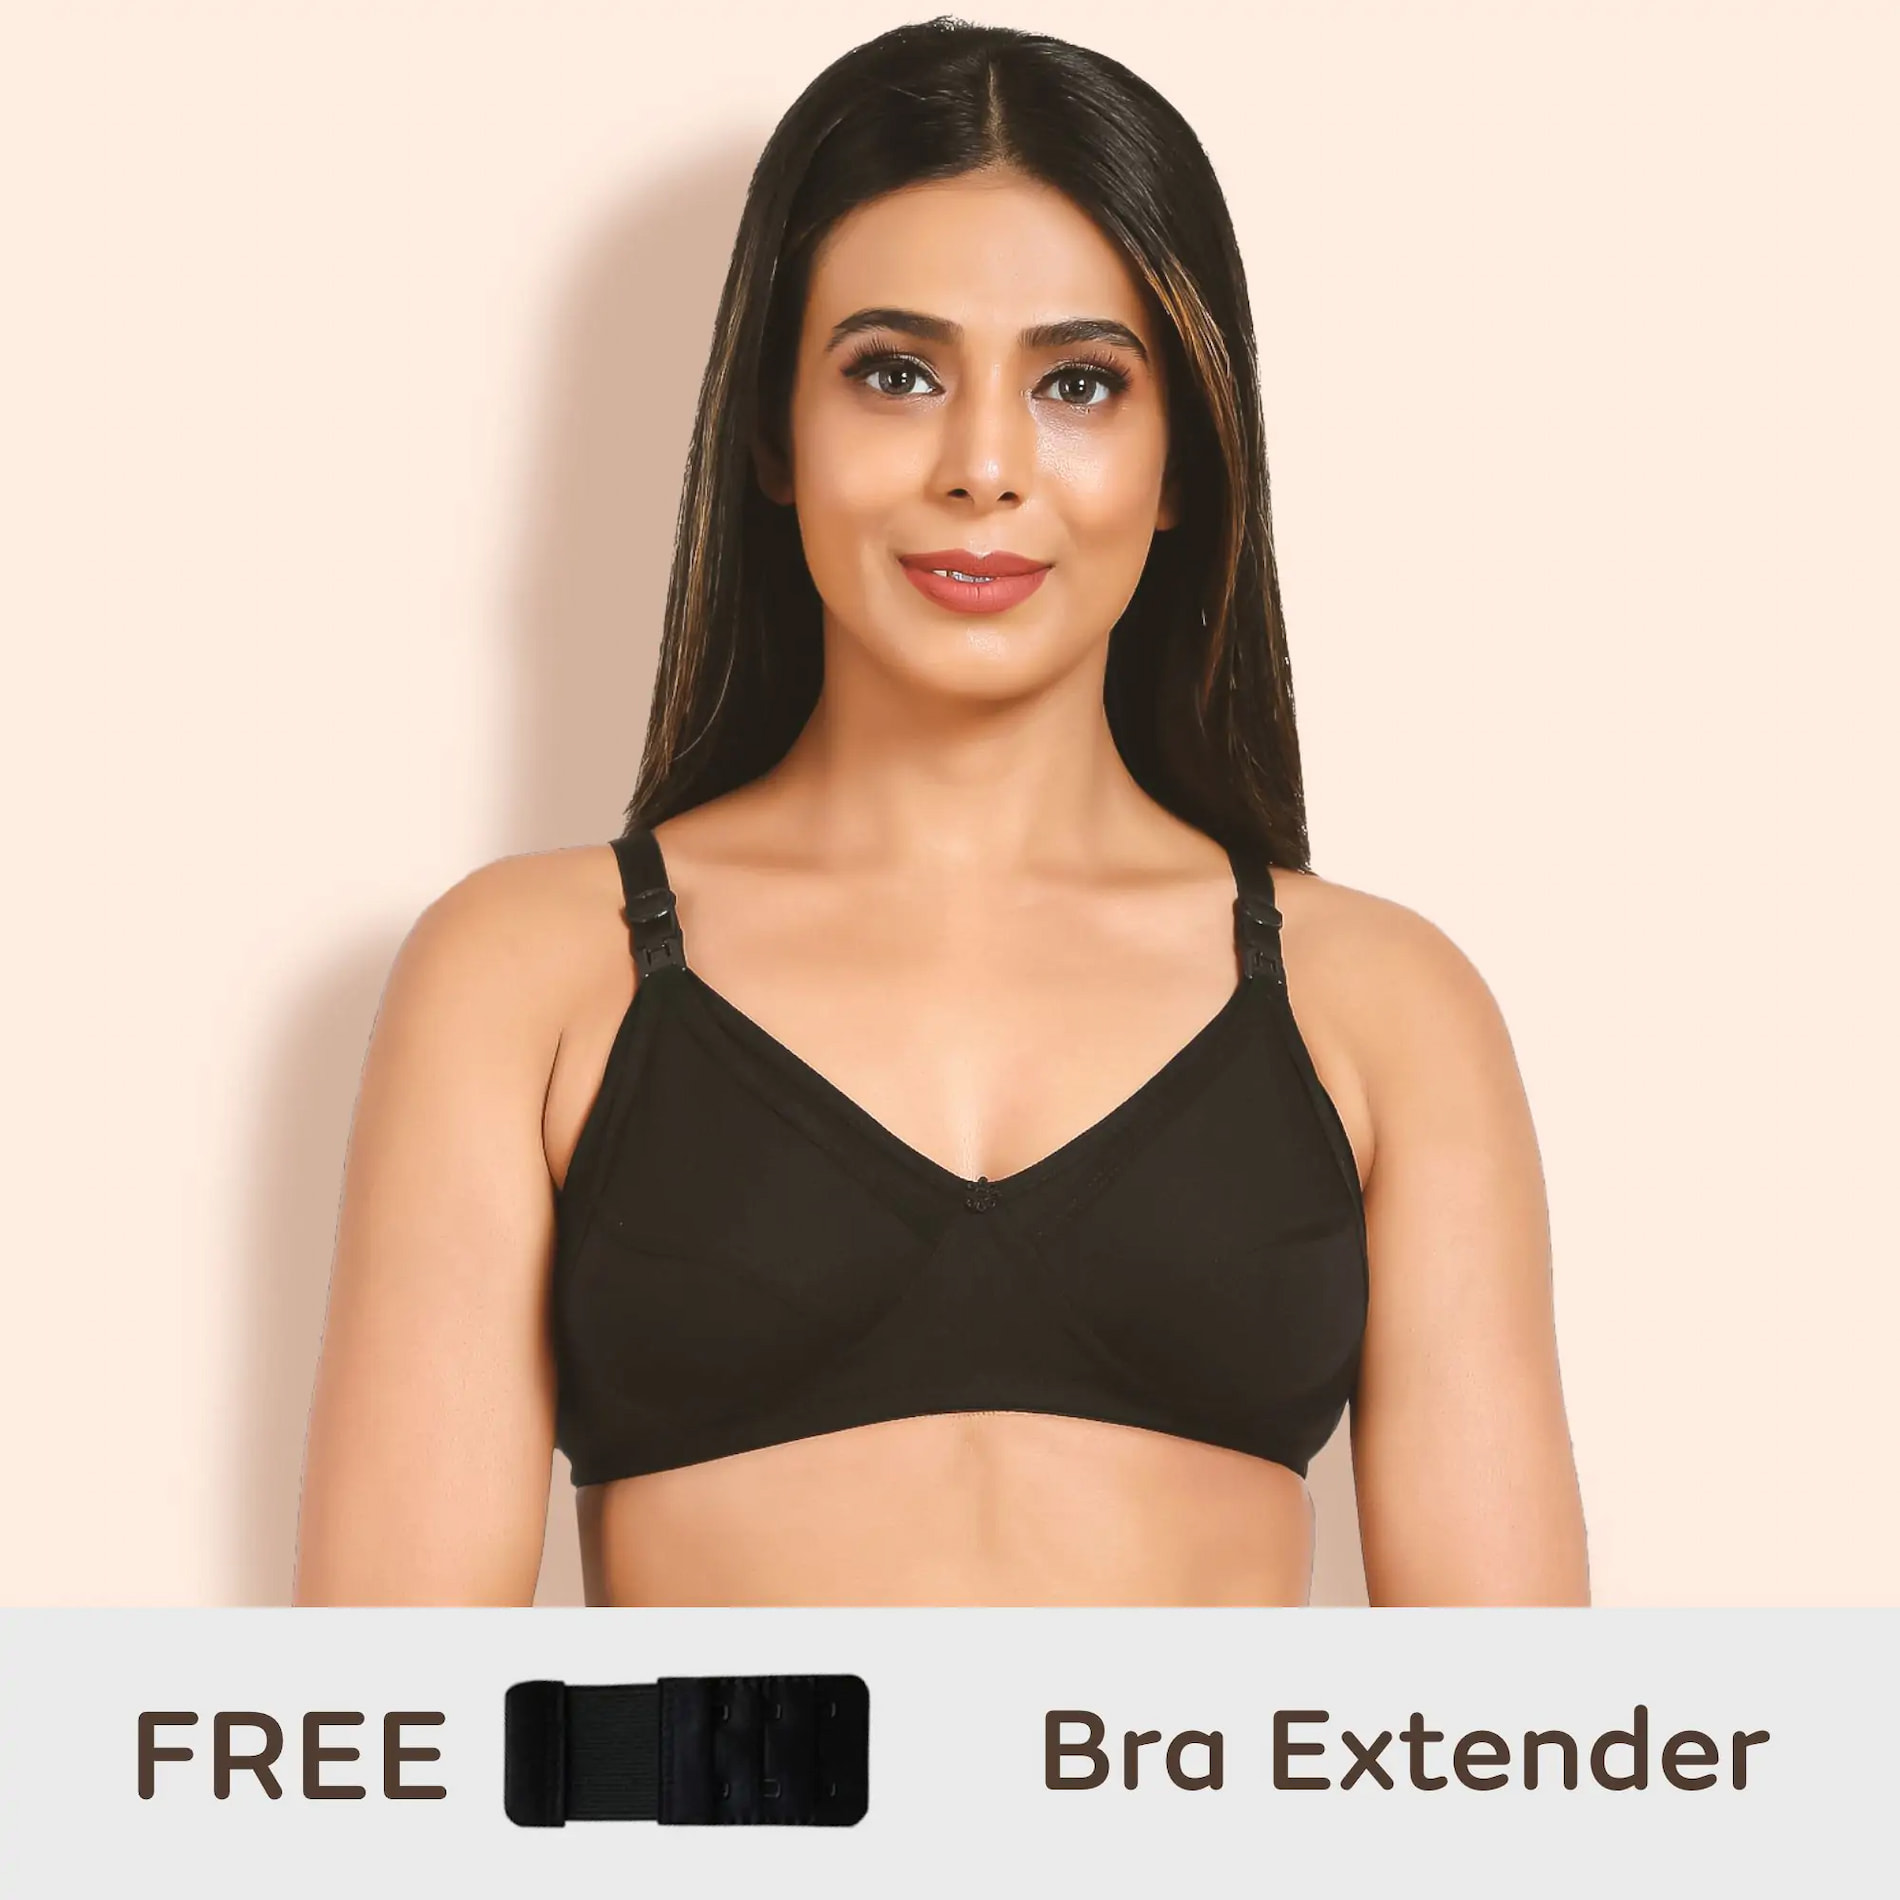 Mylo Maternity/Nursing Bras Non-Wired, Non-Padded with free Bra Extender - Classic Black 34 B 